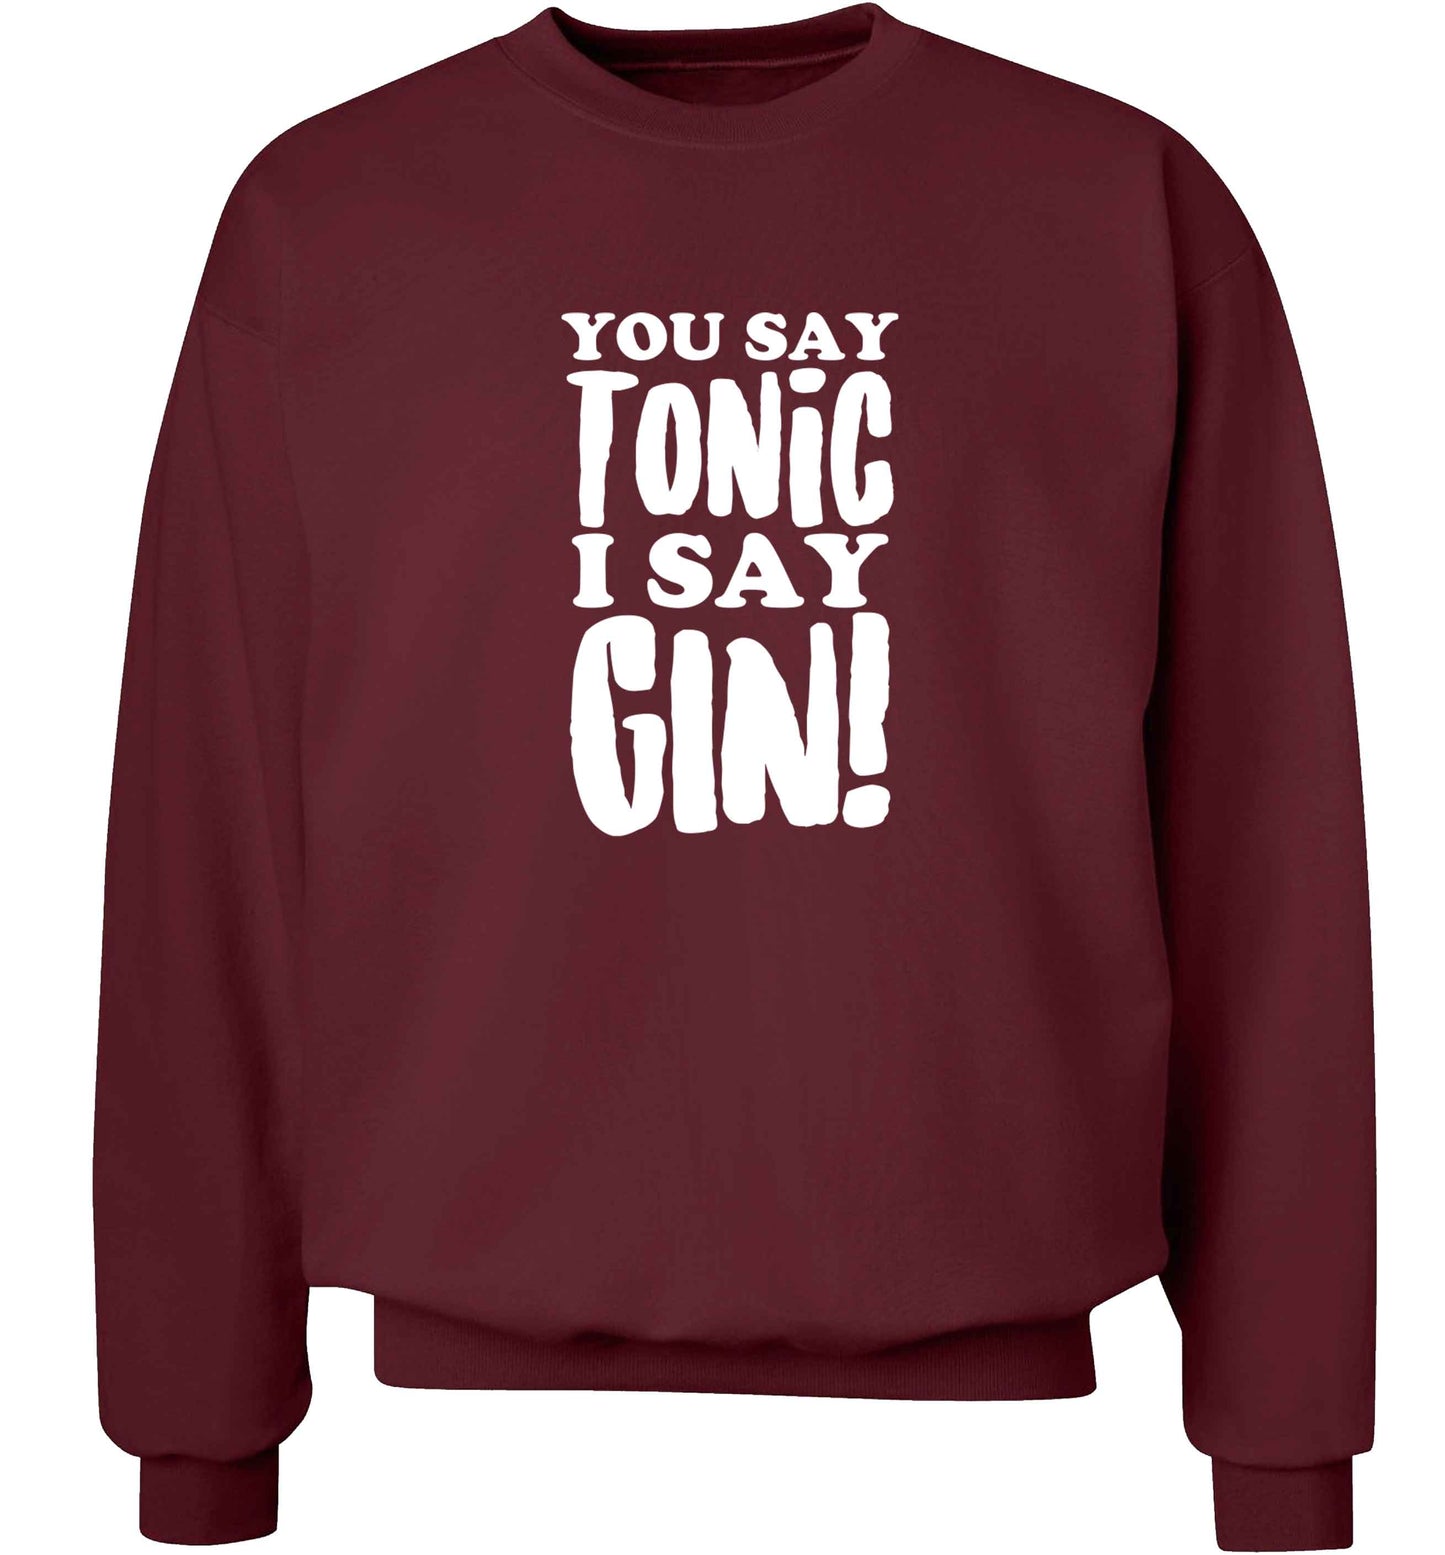 You say tonic I say gin adult's unisex maroon sweater 2XL